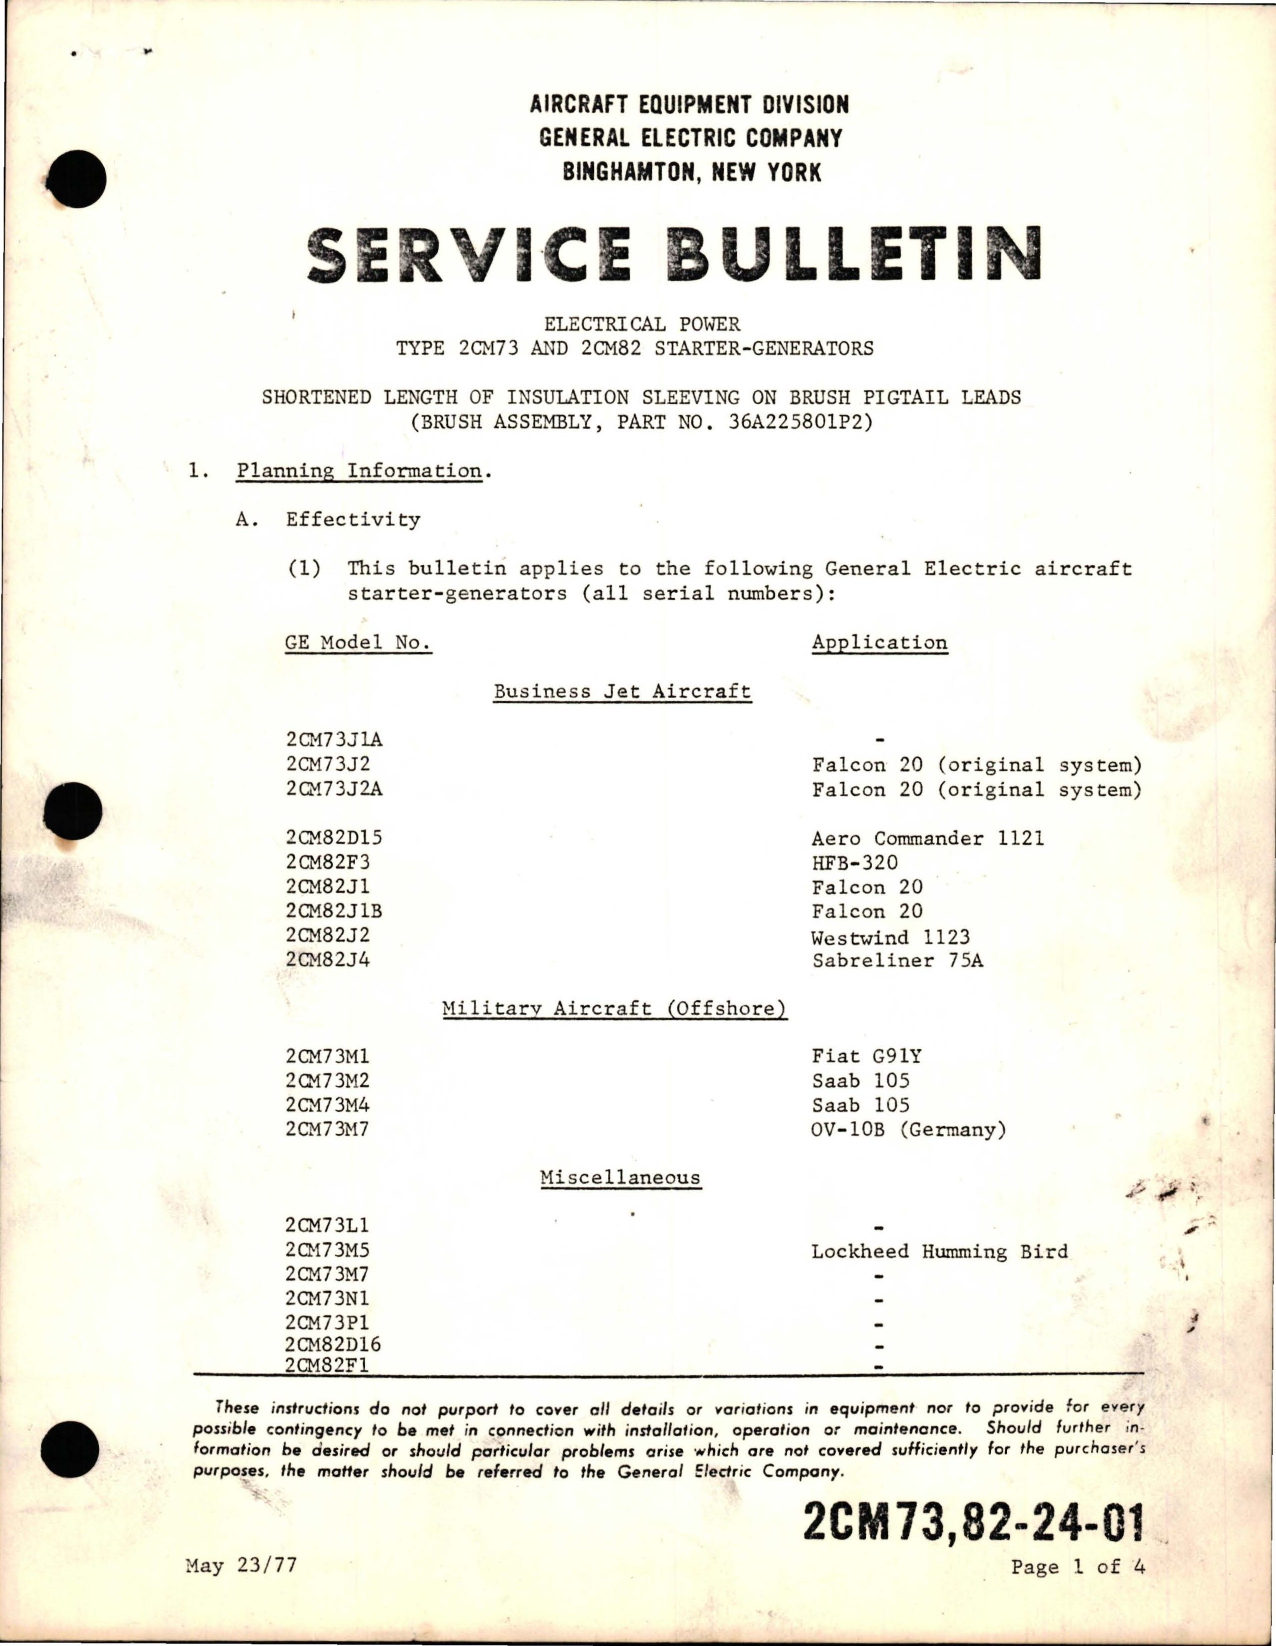 Sample page 1 from AirCorps Library document: Shortened Length of Insulation Sleeving on Brush Pigtail Leads - Part 36A225801P2 on Starter Generators - Types 2CM73 and 2CM82